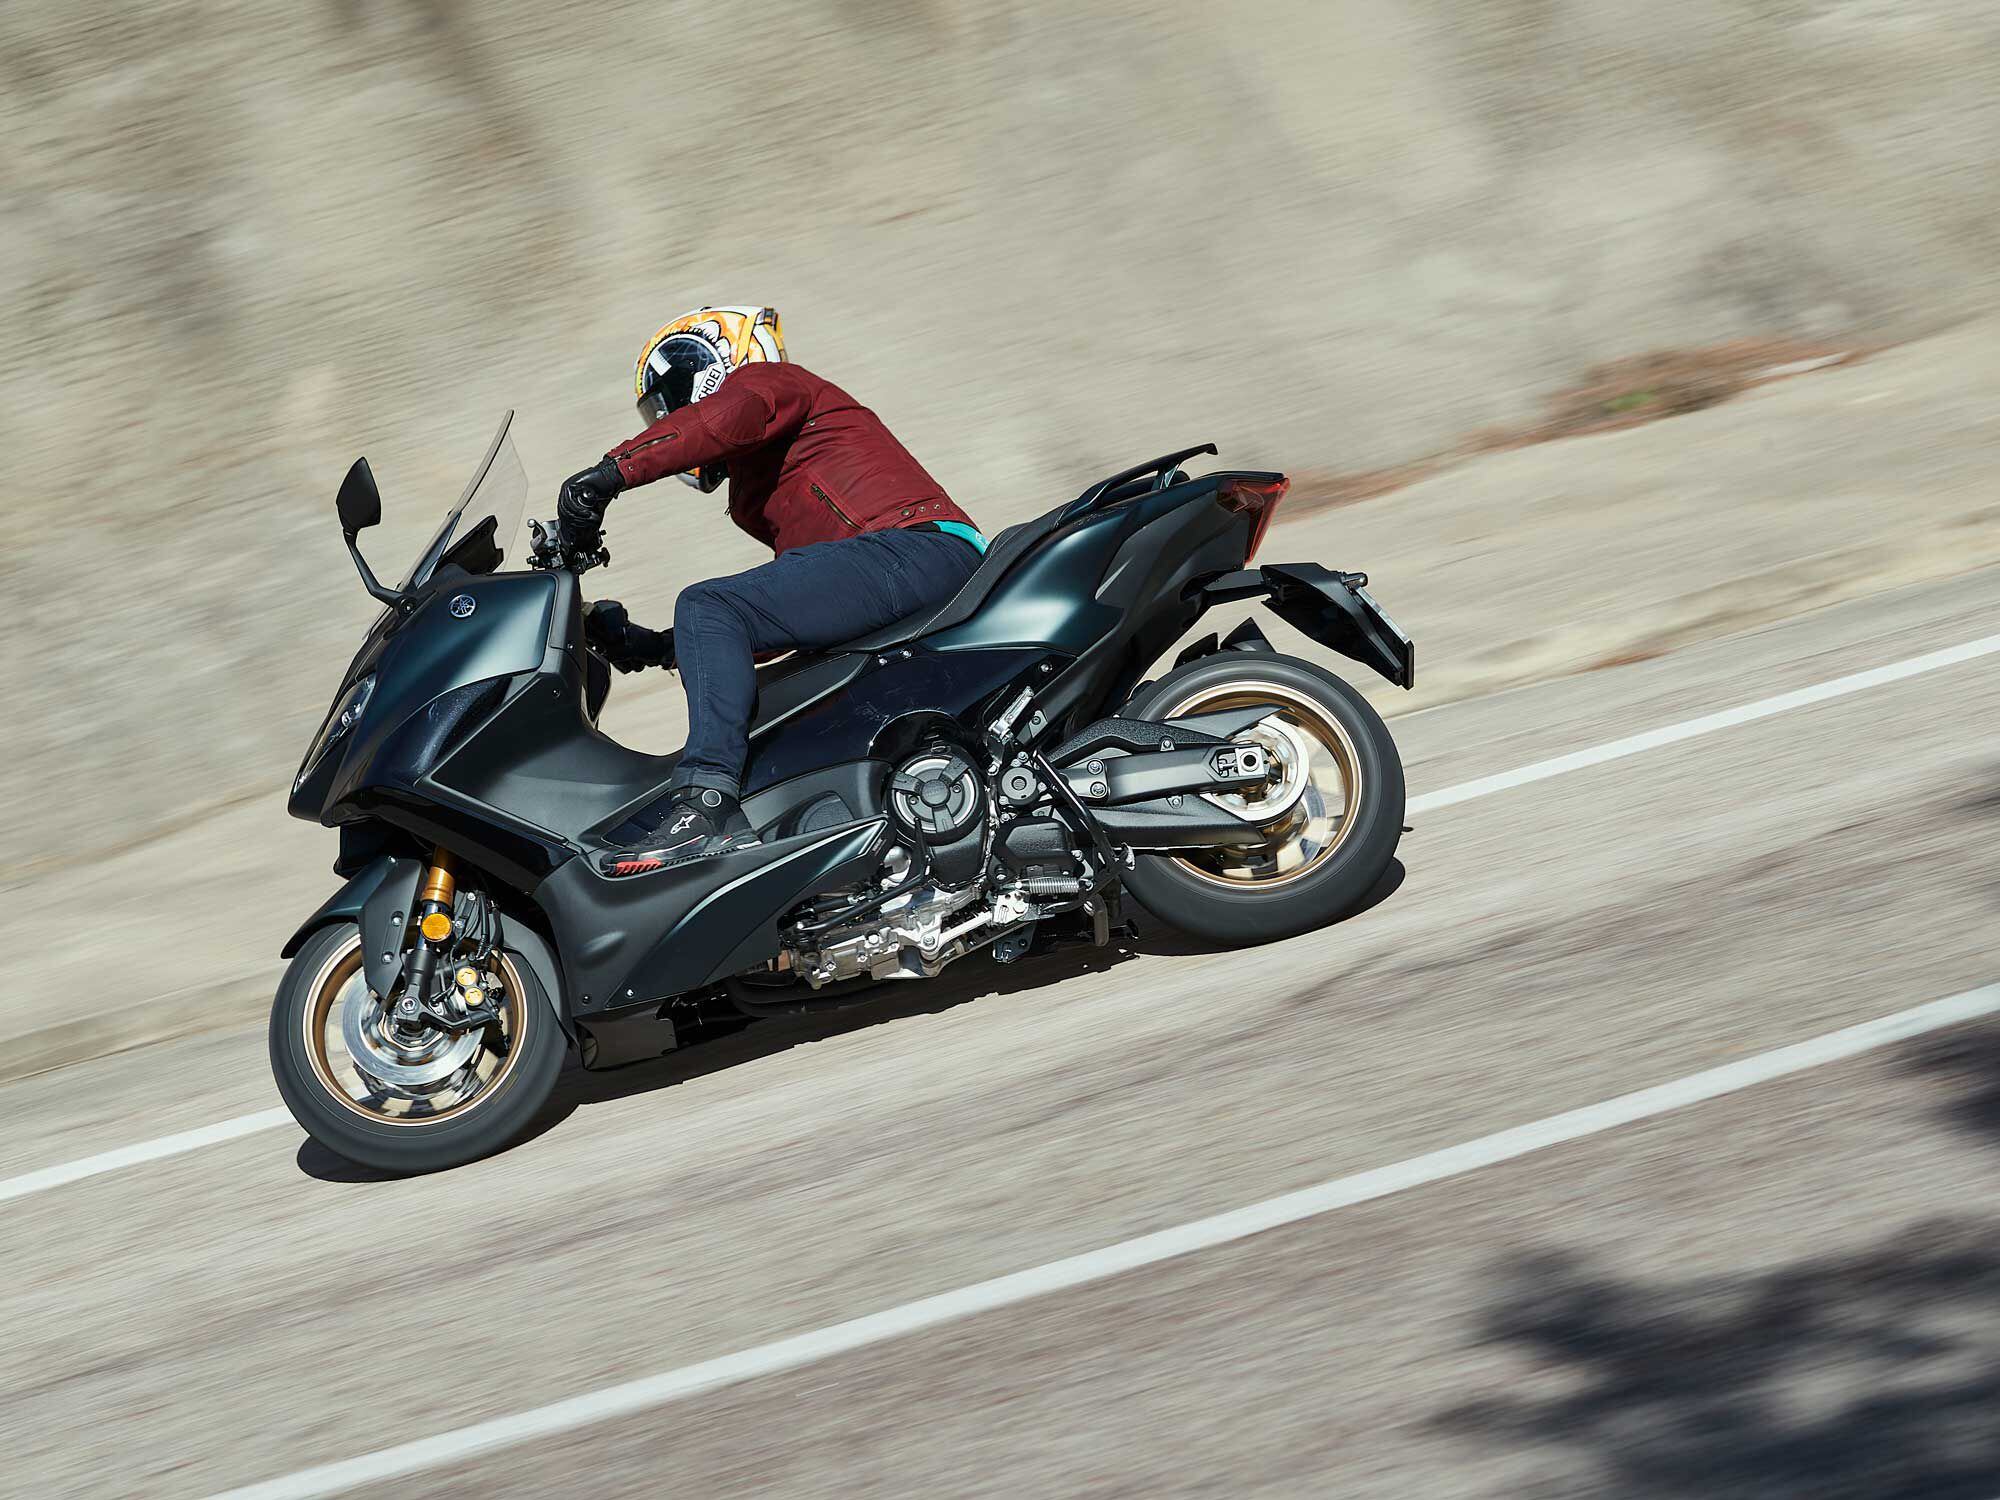 TMAX has been a huge success for Yamaha, with 350,000 units sold worldwide.